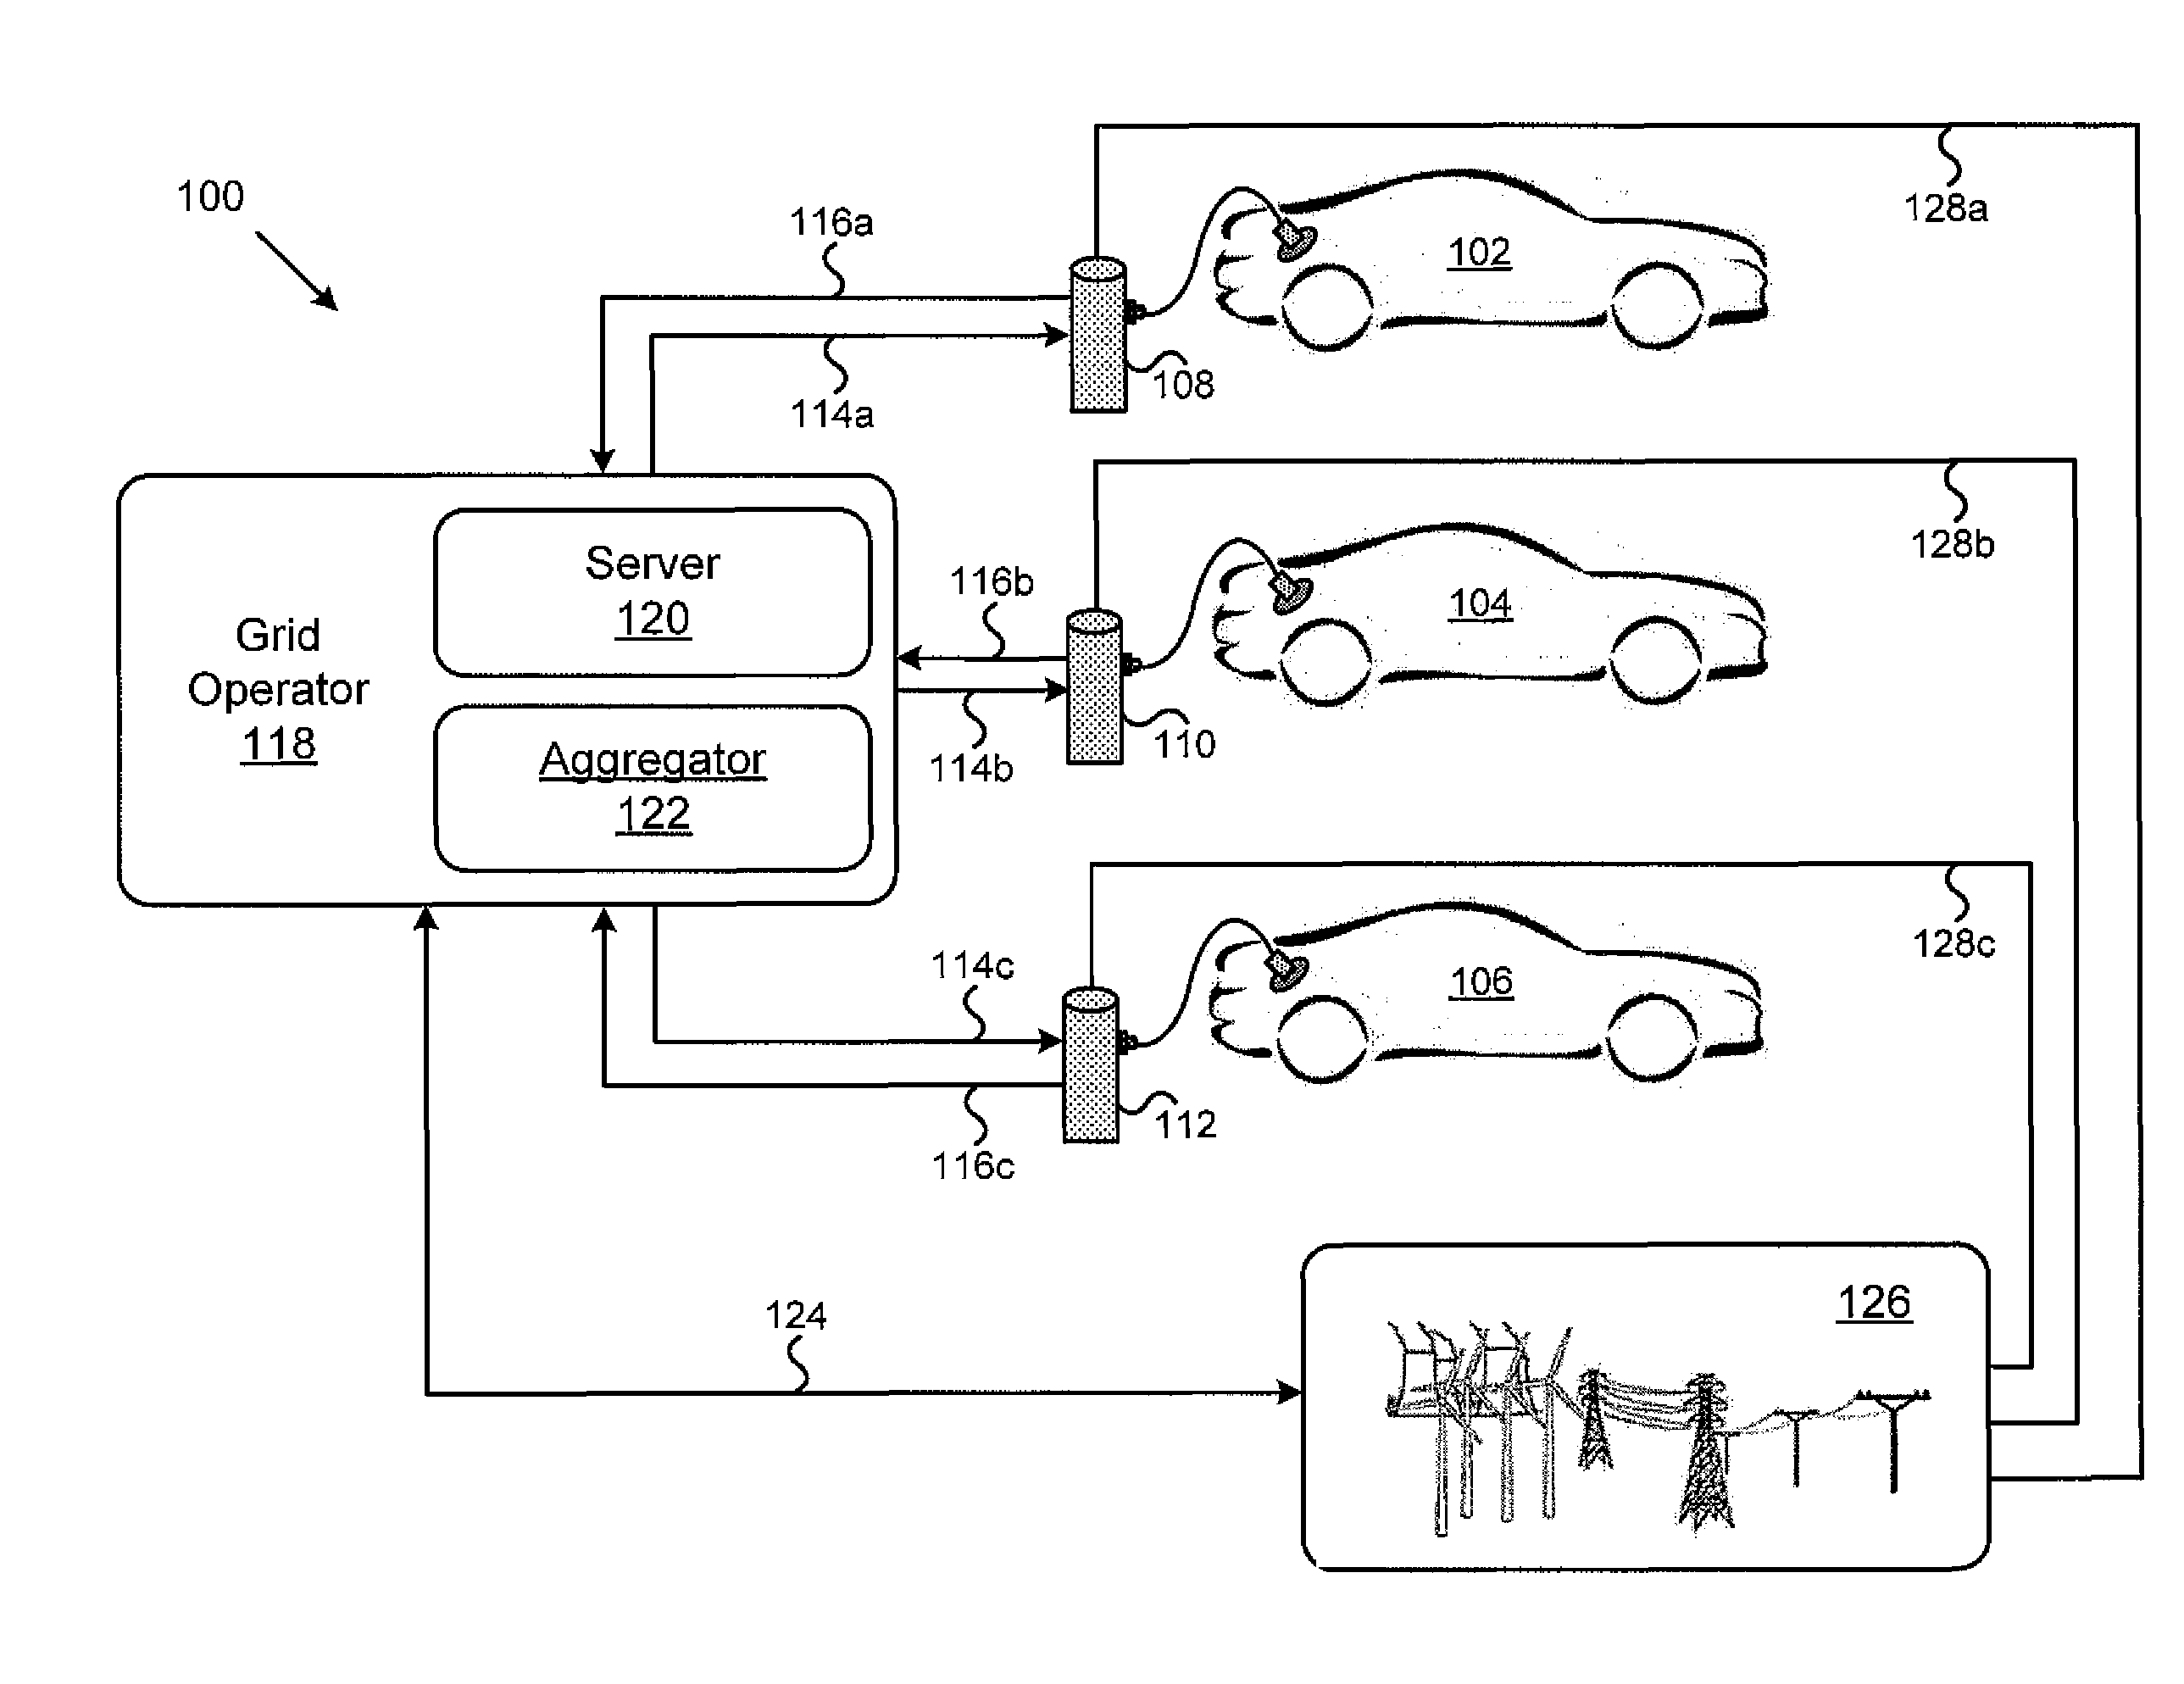 System for Optimizing Electricity Use from an Electric Grid and Related Method